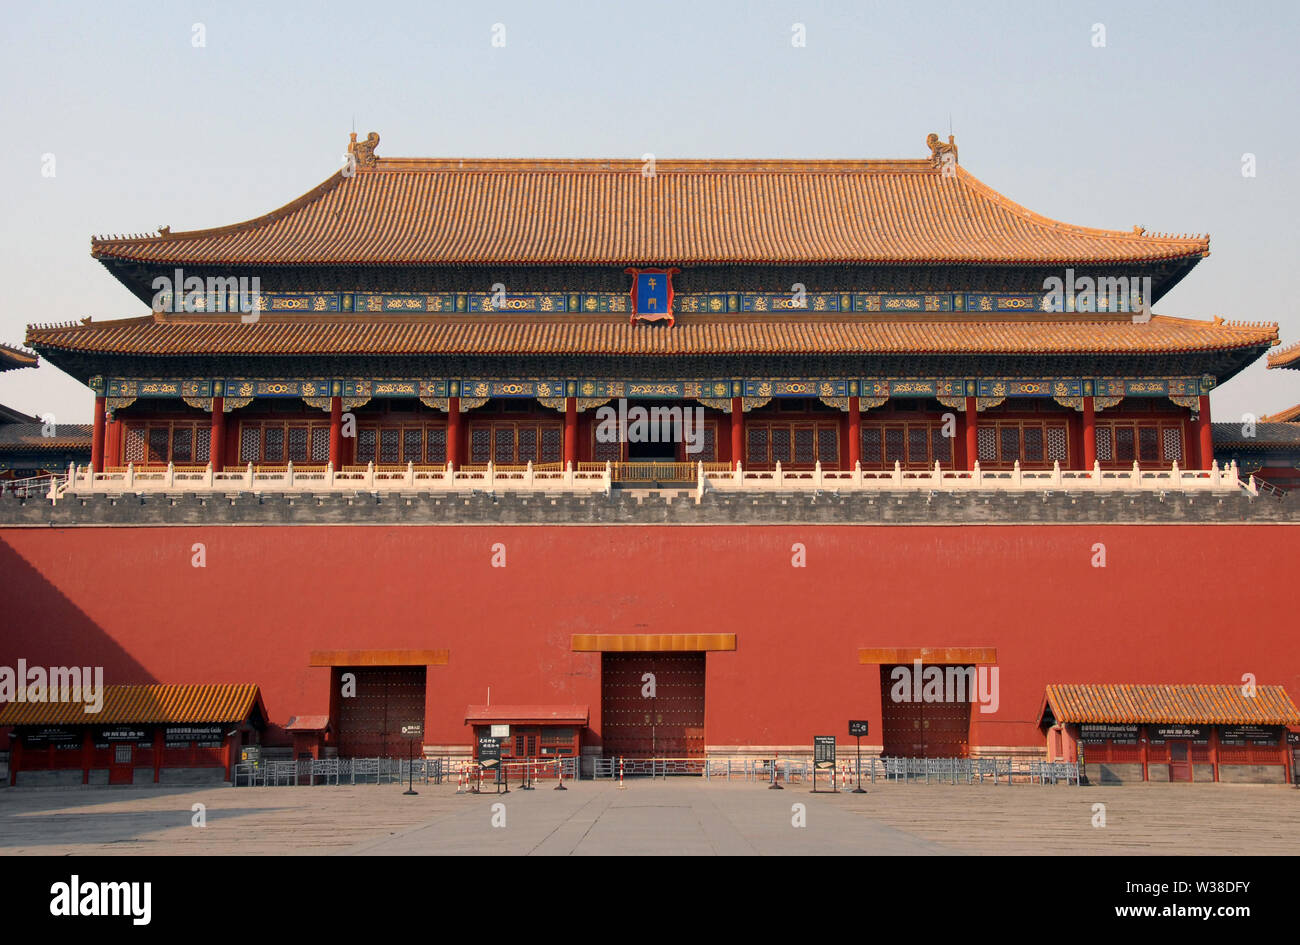 The Forbidden City, Beijing, China. The entrance to the Forbidden City has a sign saying 'Meridian Gate'. The Forbidden City has Chinese architecture. Stock Photo